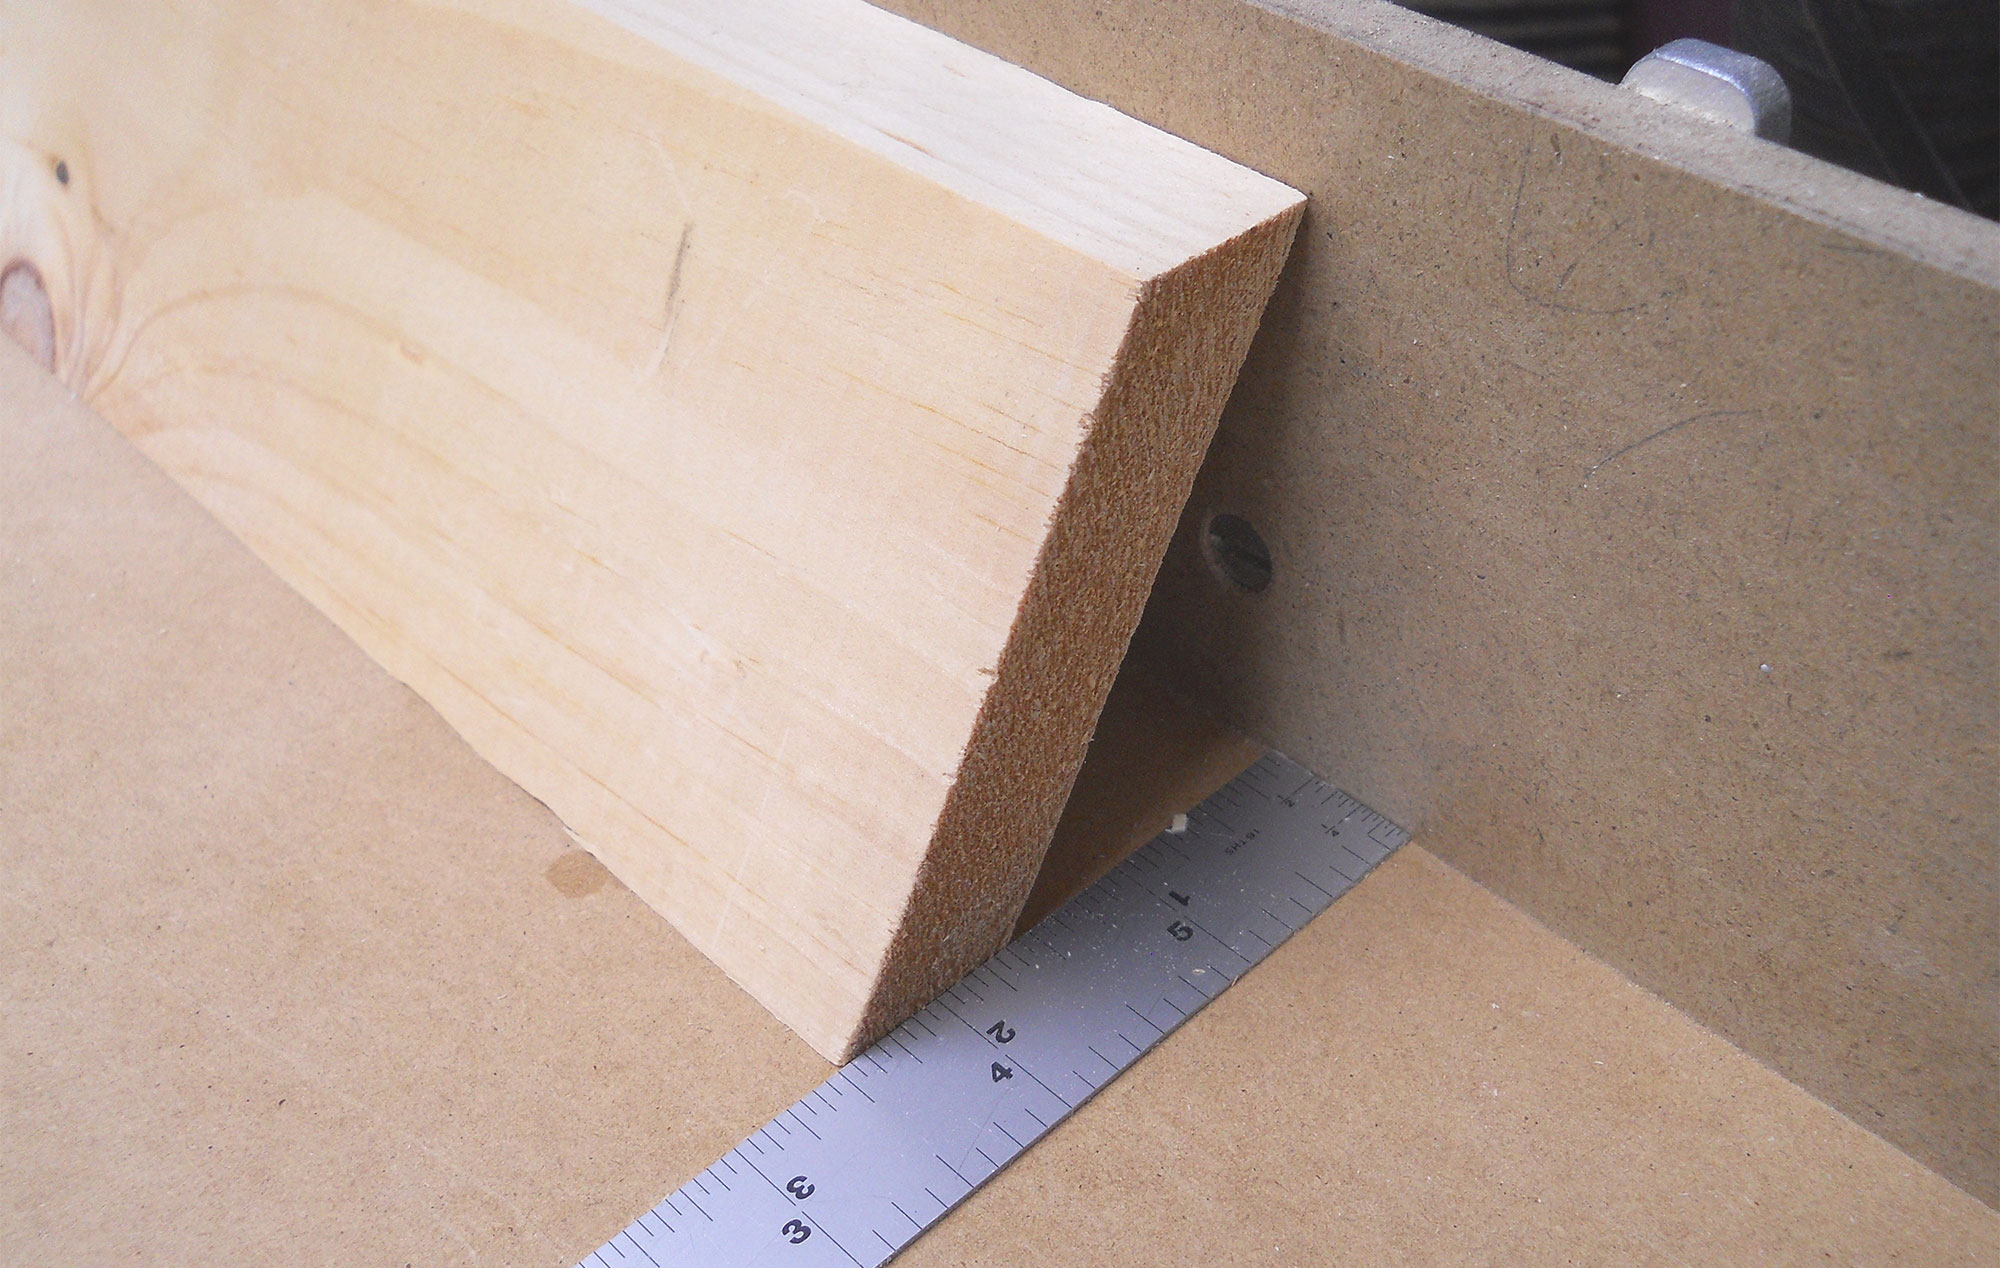 Measuring for compound miters.